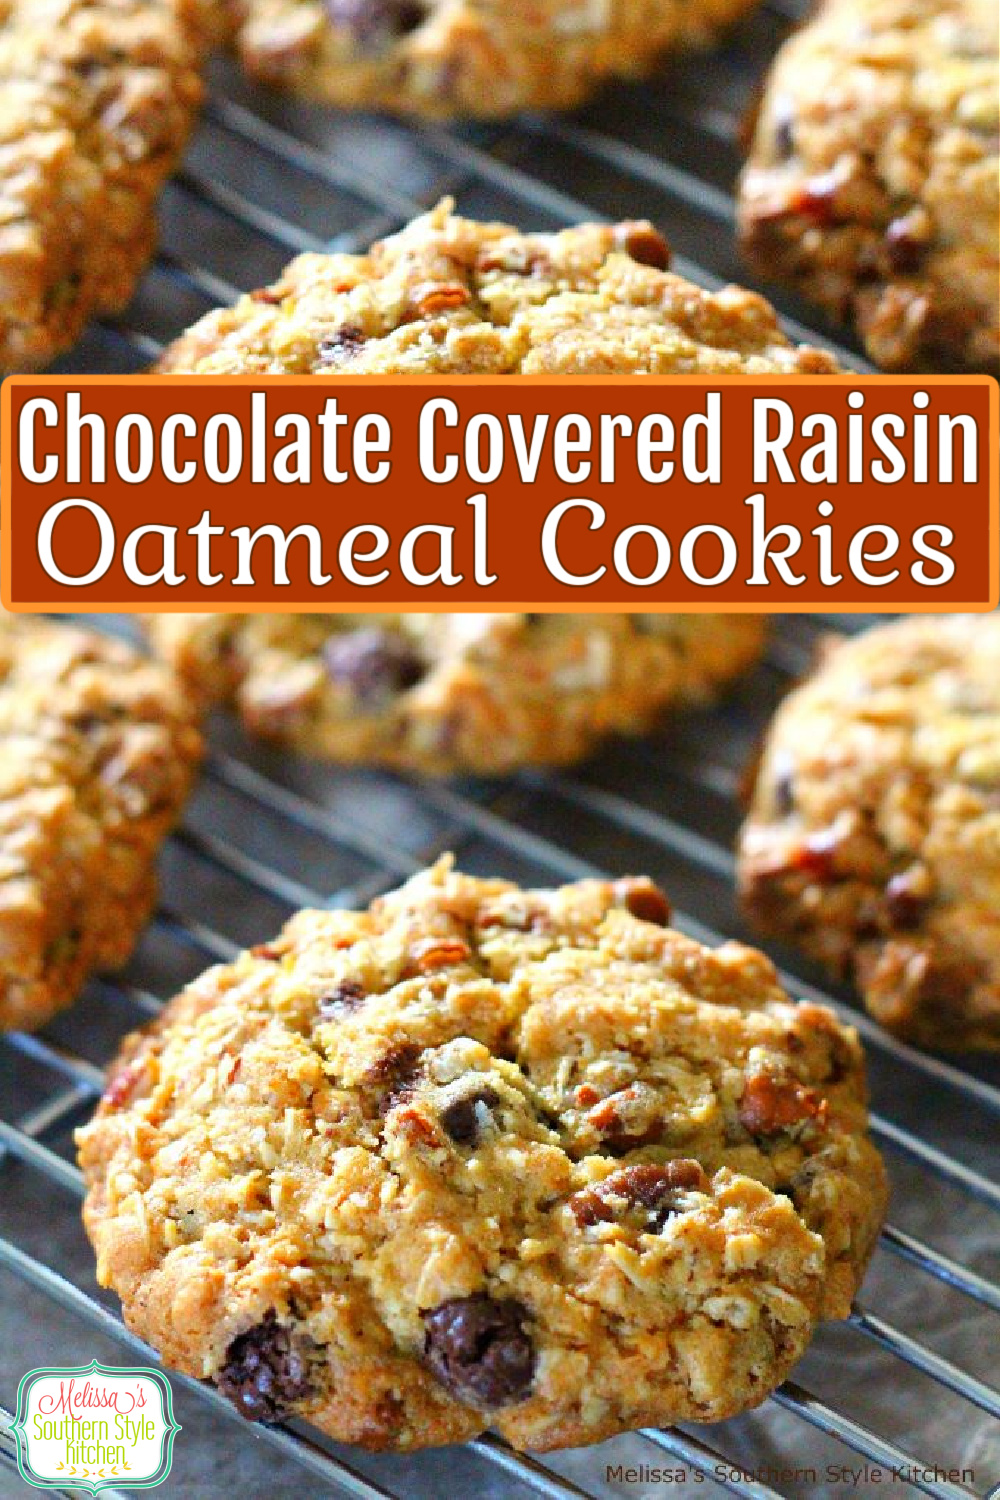 These classic cookies get an update with pecans and chocolate covered raisins #oatmealraisincookies #cookies #oatmealcookies #chocolate #pecancookies #cookierecipes #holidaybaking #holidays #christmascookies #chocolatecoveredraisins #southernfood #southernrecipes via @melissasssk